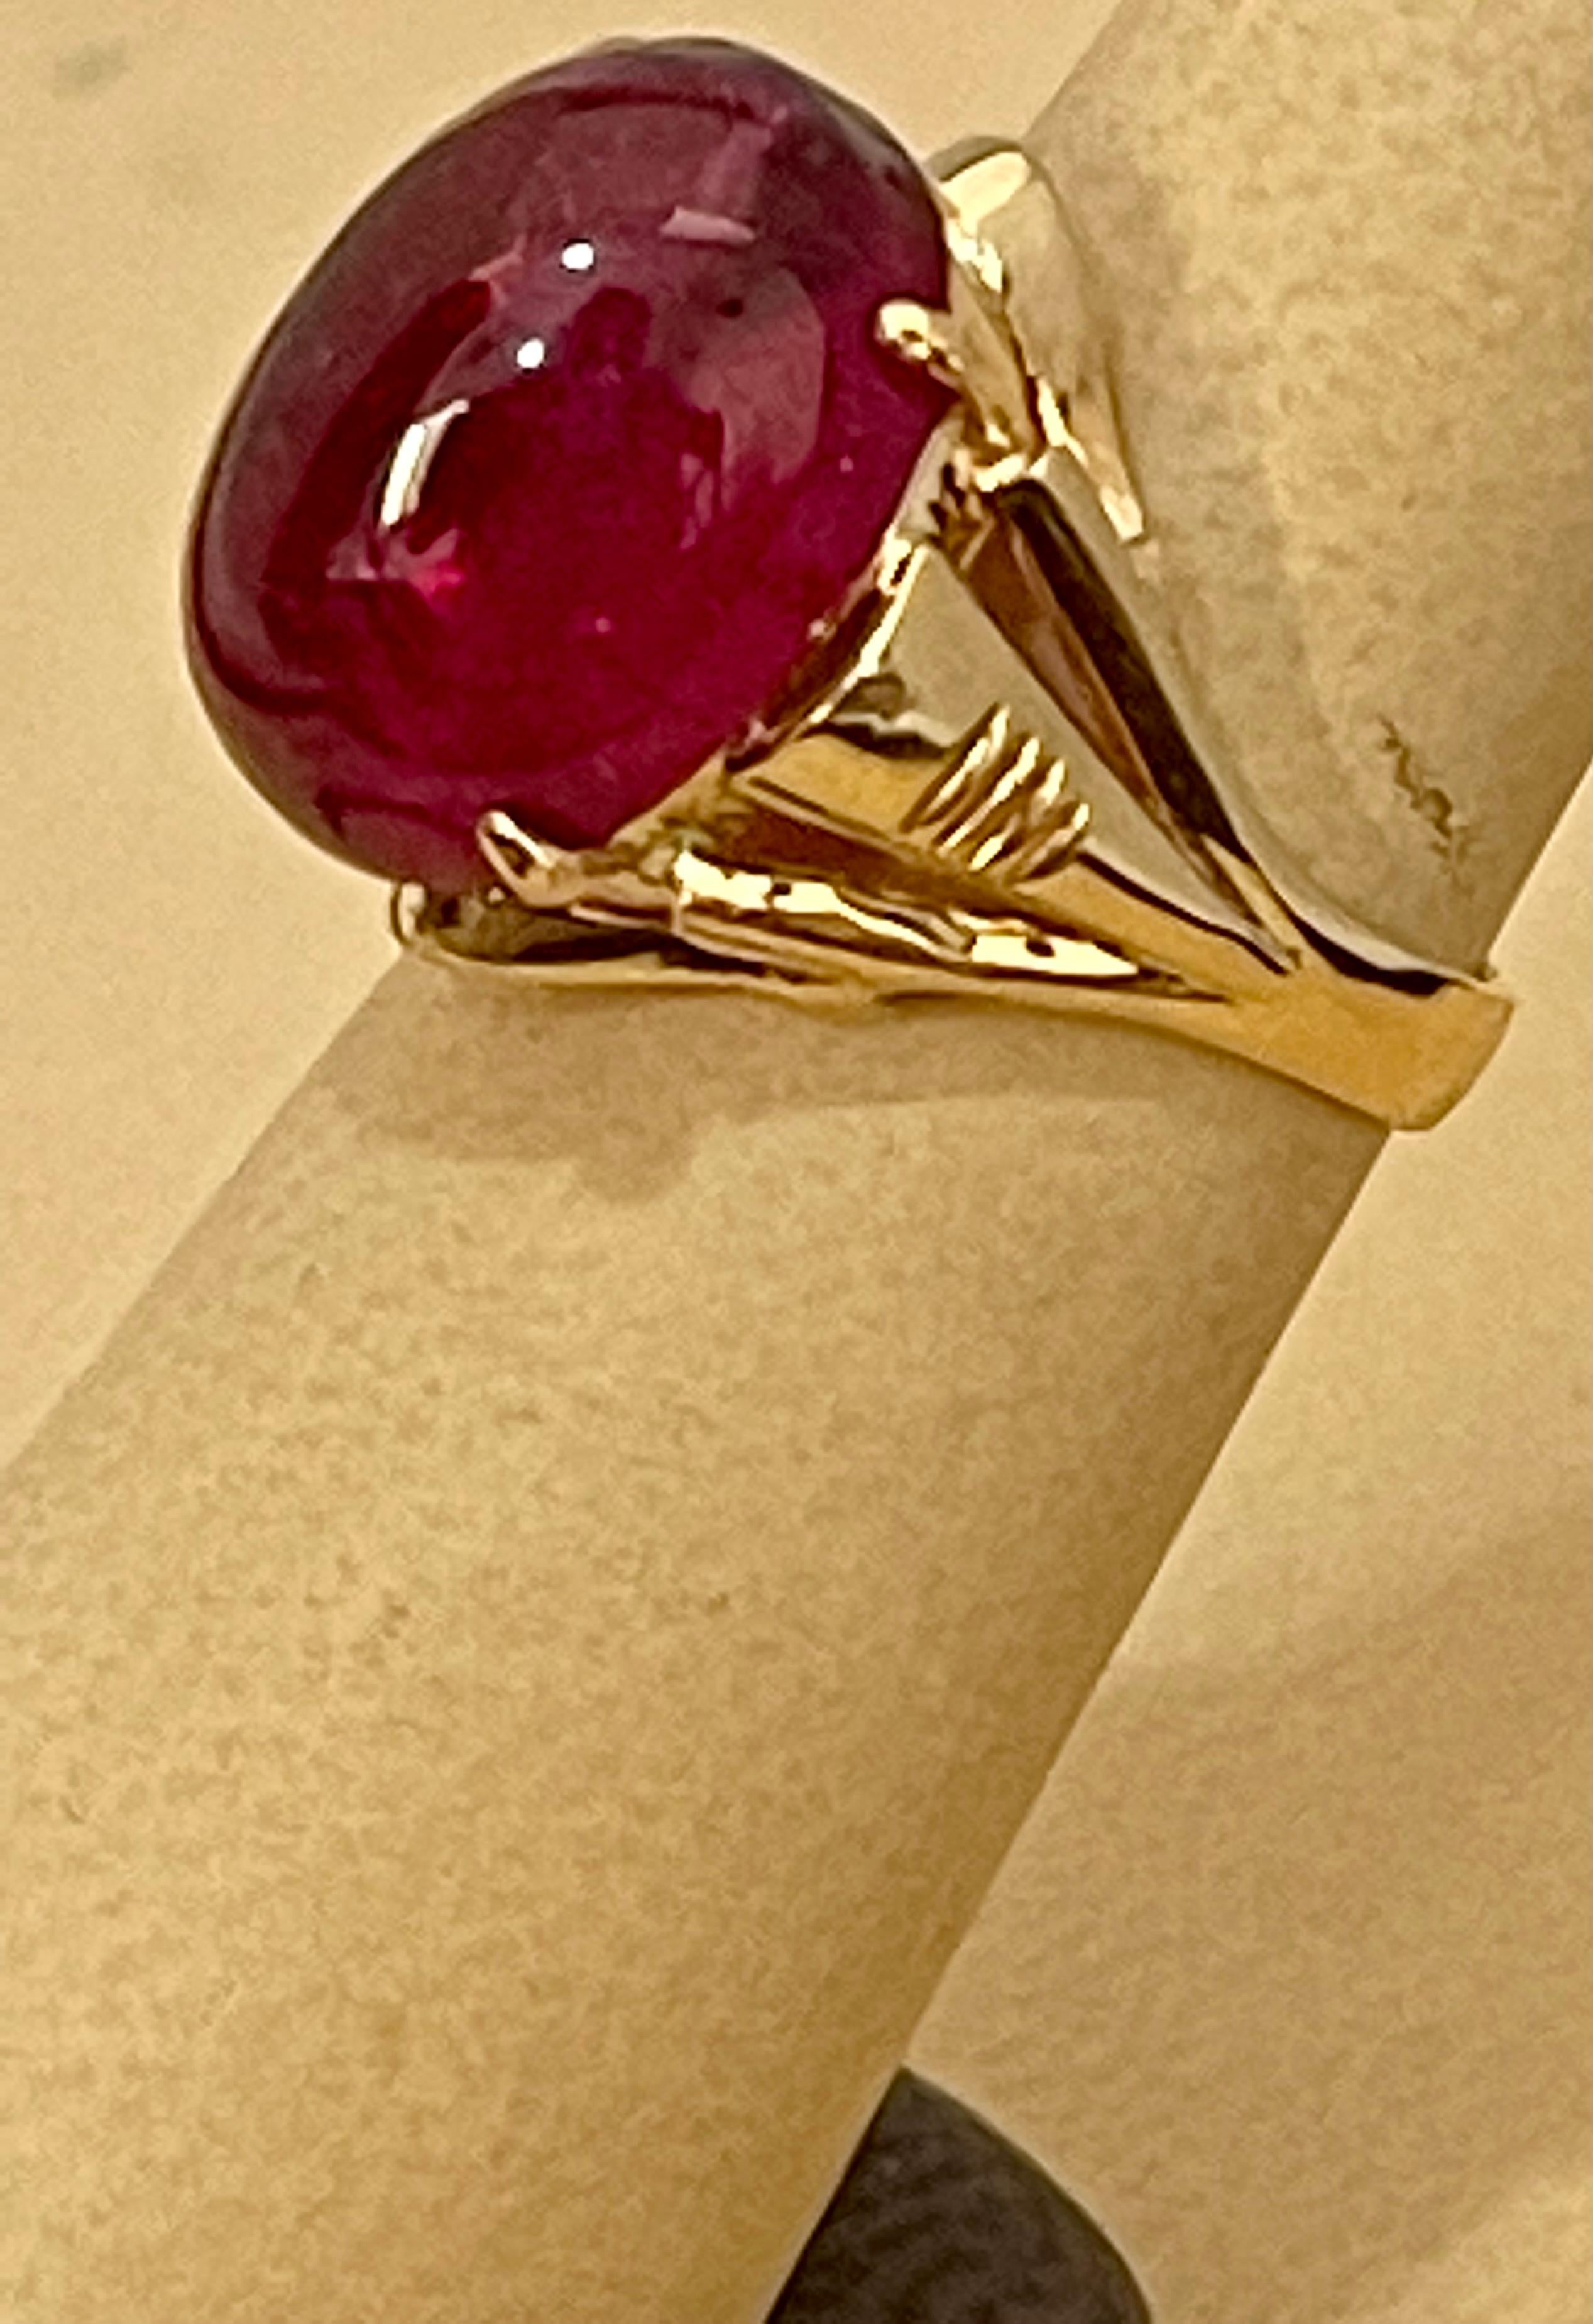 12.6 Carat Oval Cut Cabochon Pink Tourmaline 14 Karat Yellow Gold Ring In Excellent Condition For Sale In New York, NY